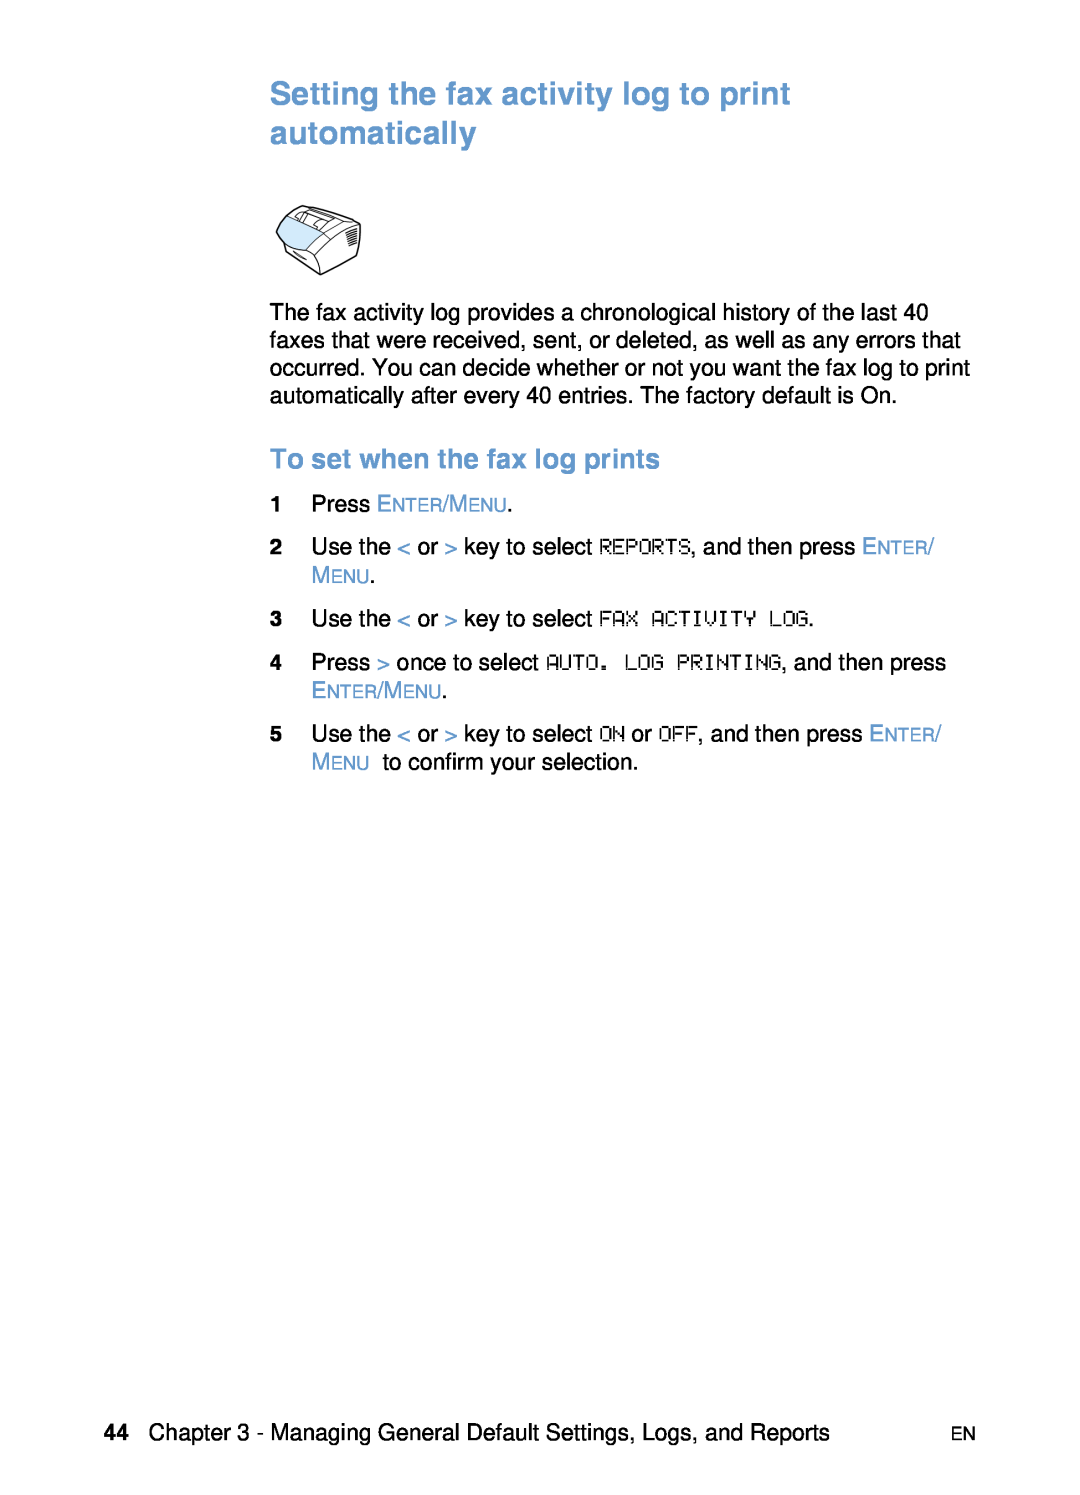 HP 3200 manual Setting the fax activity log to print automatically, To set when the fax log prints 